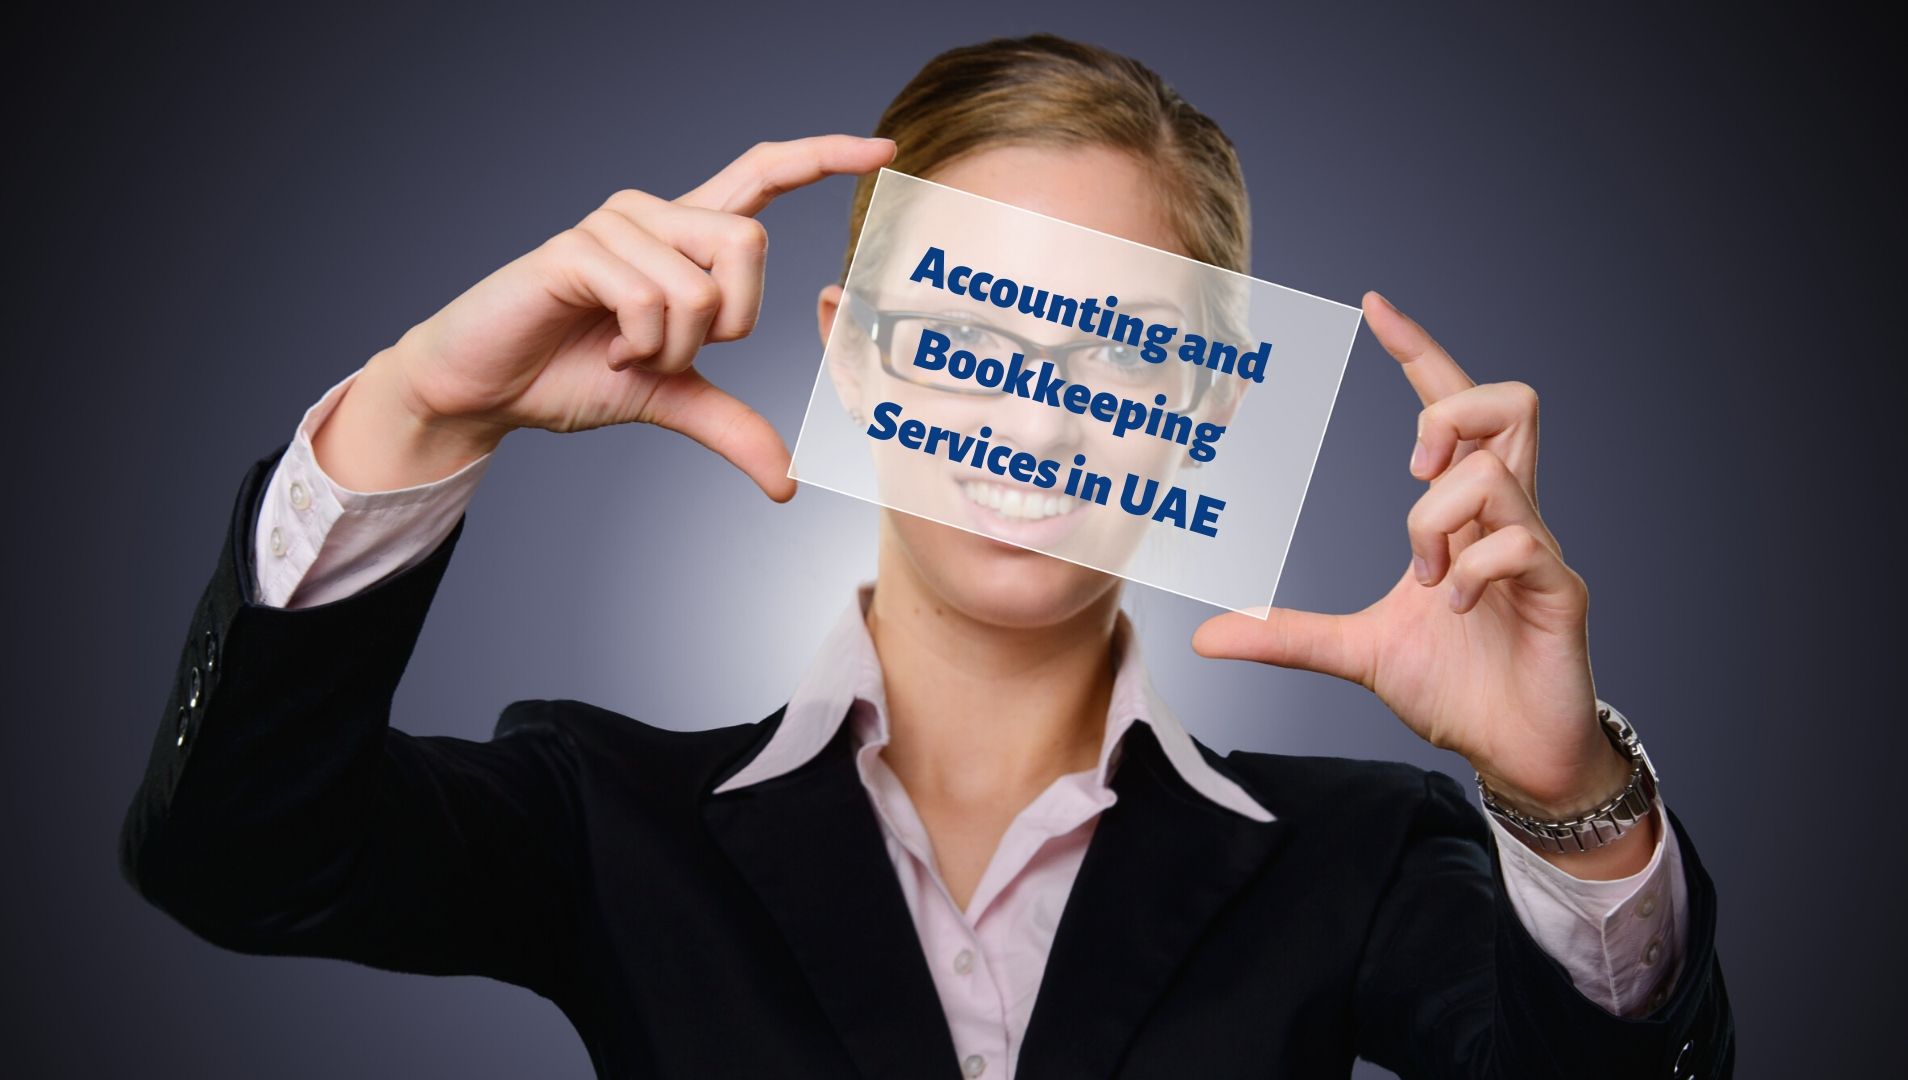 Accounting and Bookkeeping Service in UAE